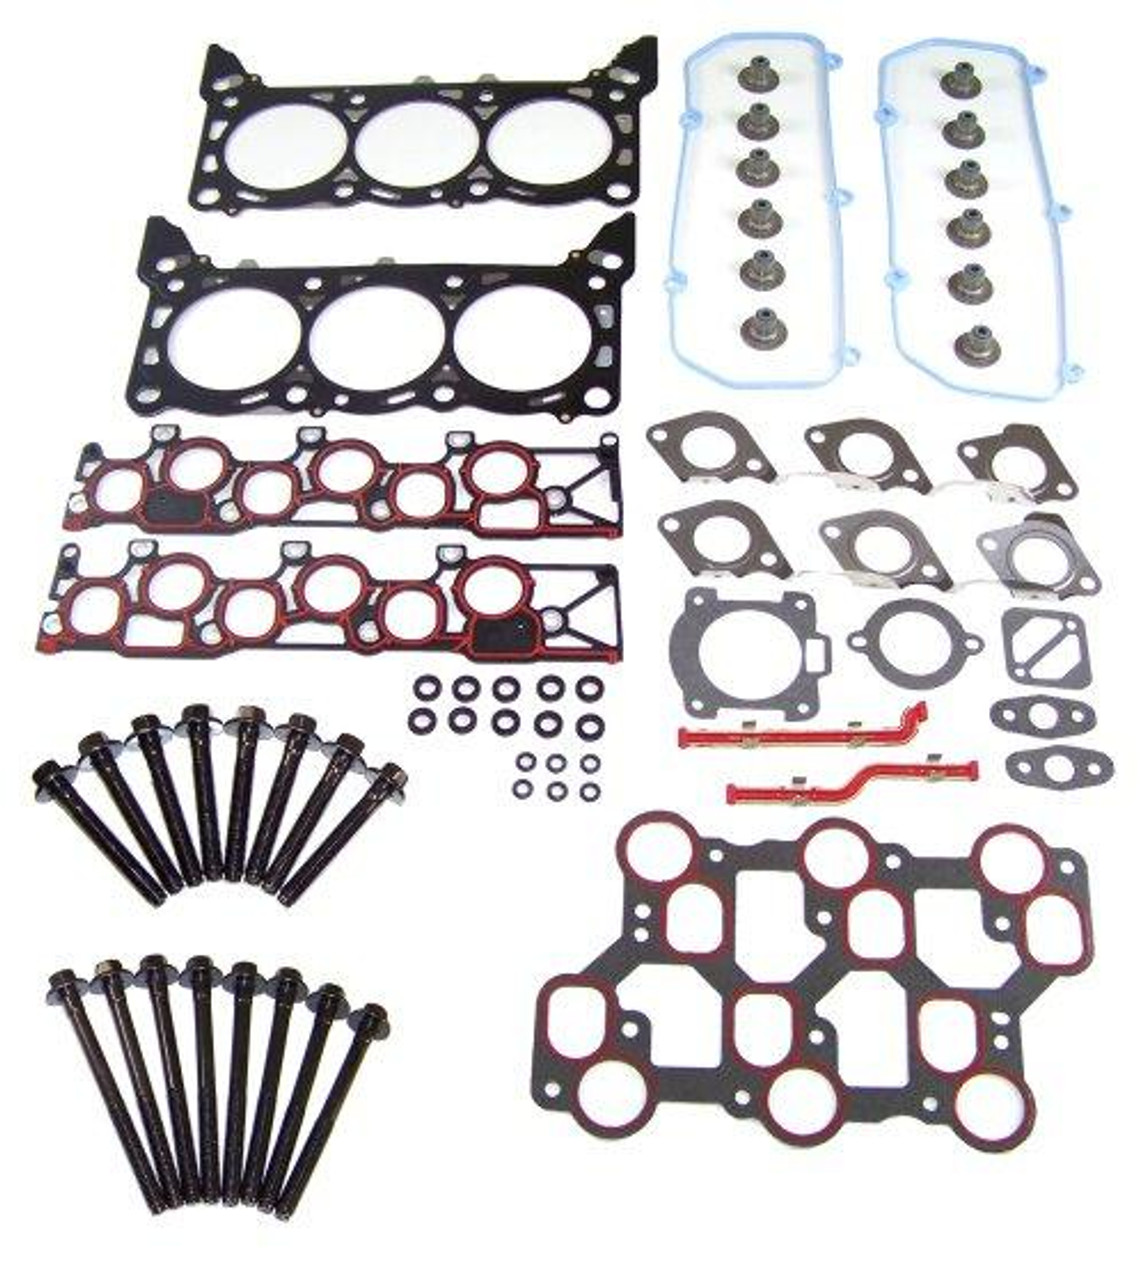 Head Gasket Set with Head Bolt Kit - 1998 Ford F-150 4.2L Engine Parts # HGB4120ZE10